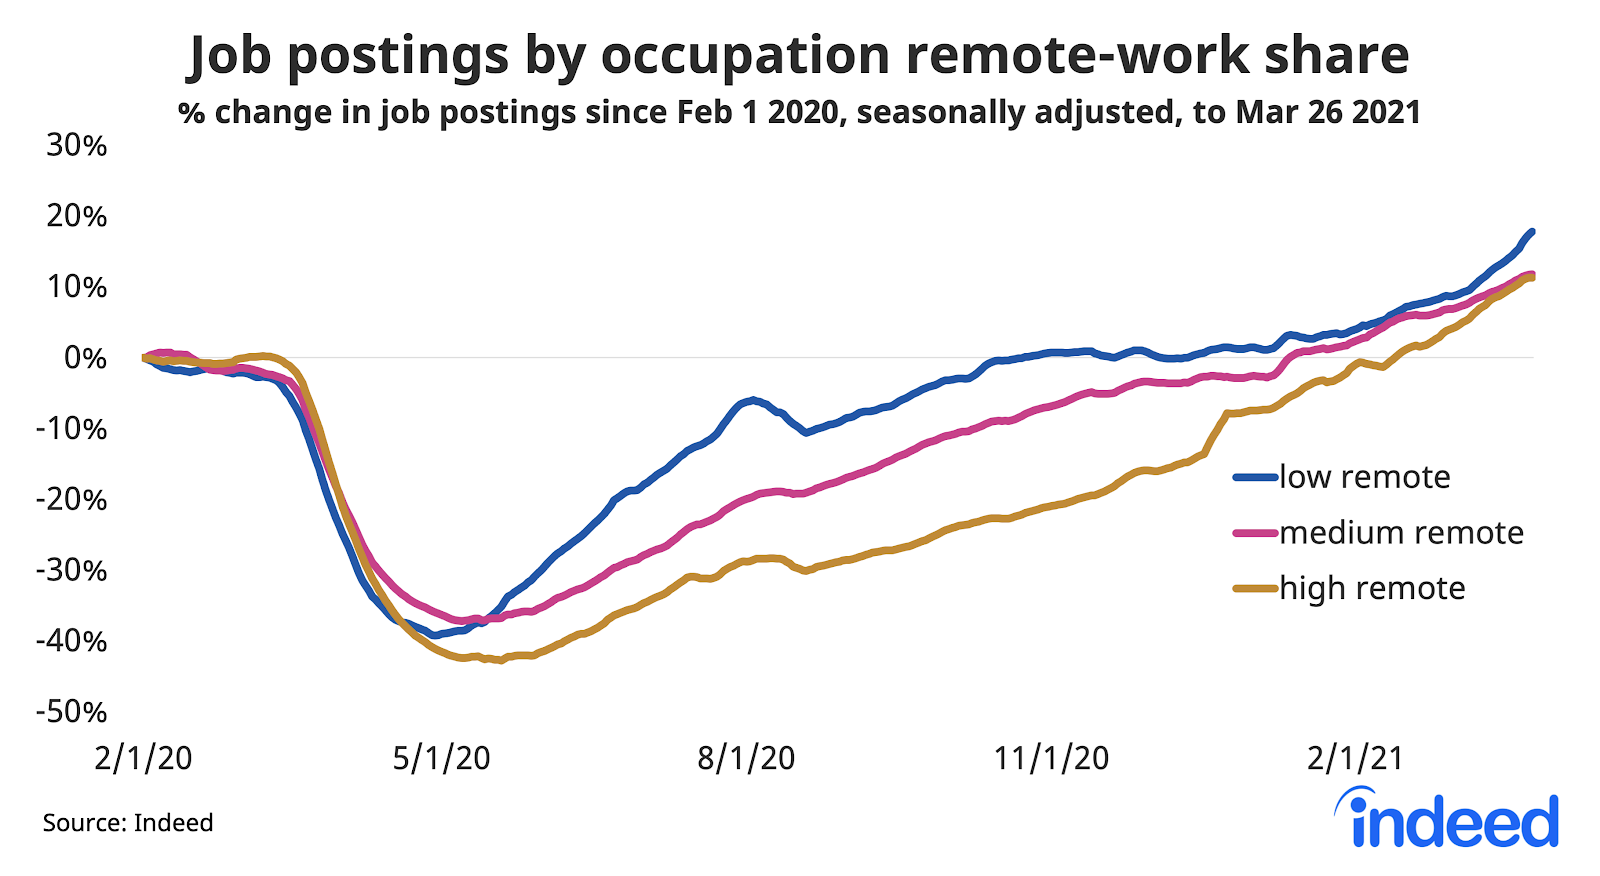 Line graph showing job postings by occupation remote-work share